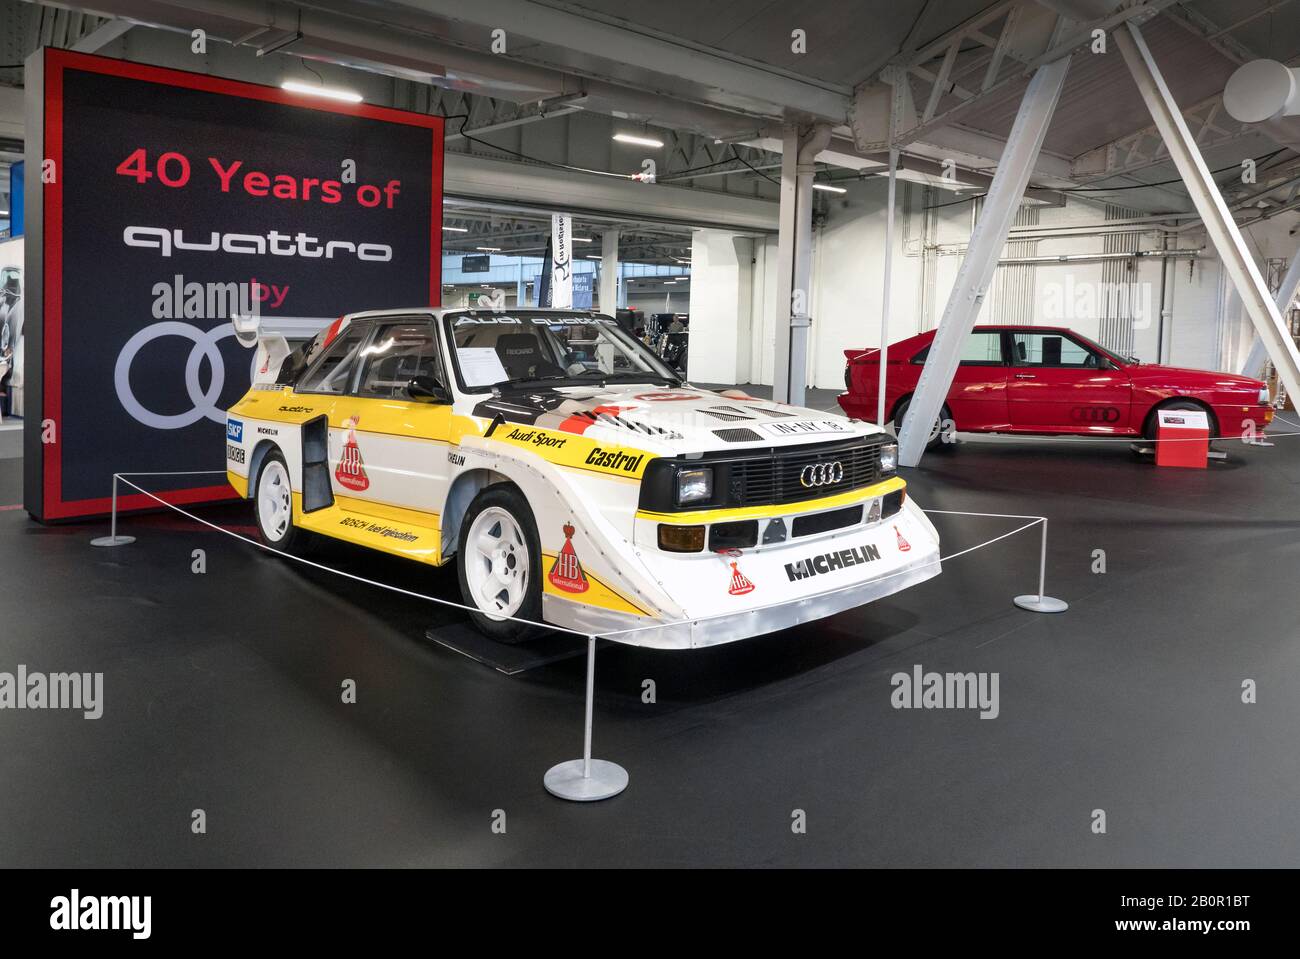 40 Years of the Audi Quattro display at The London Classic Car Show at Olympia London UK 20/02/2020 Stock Photo